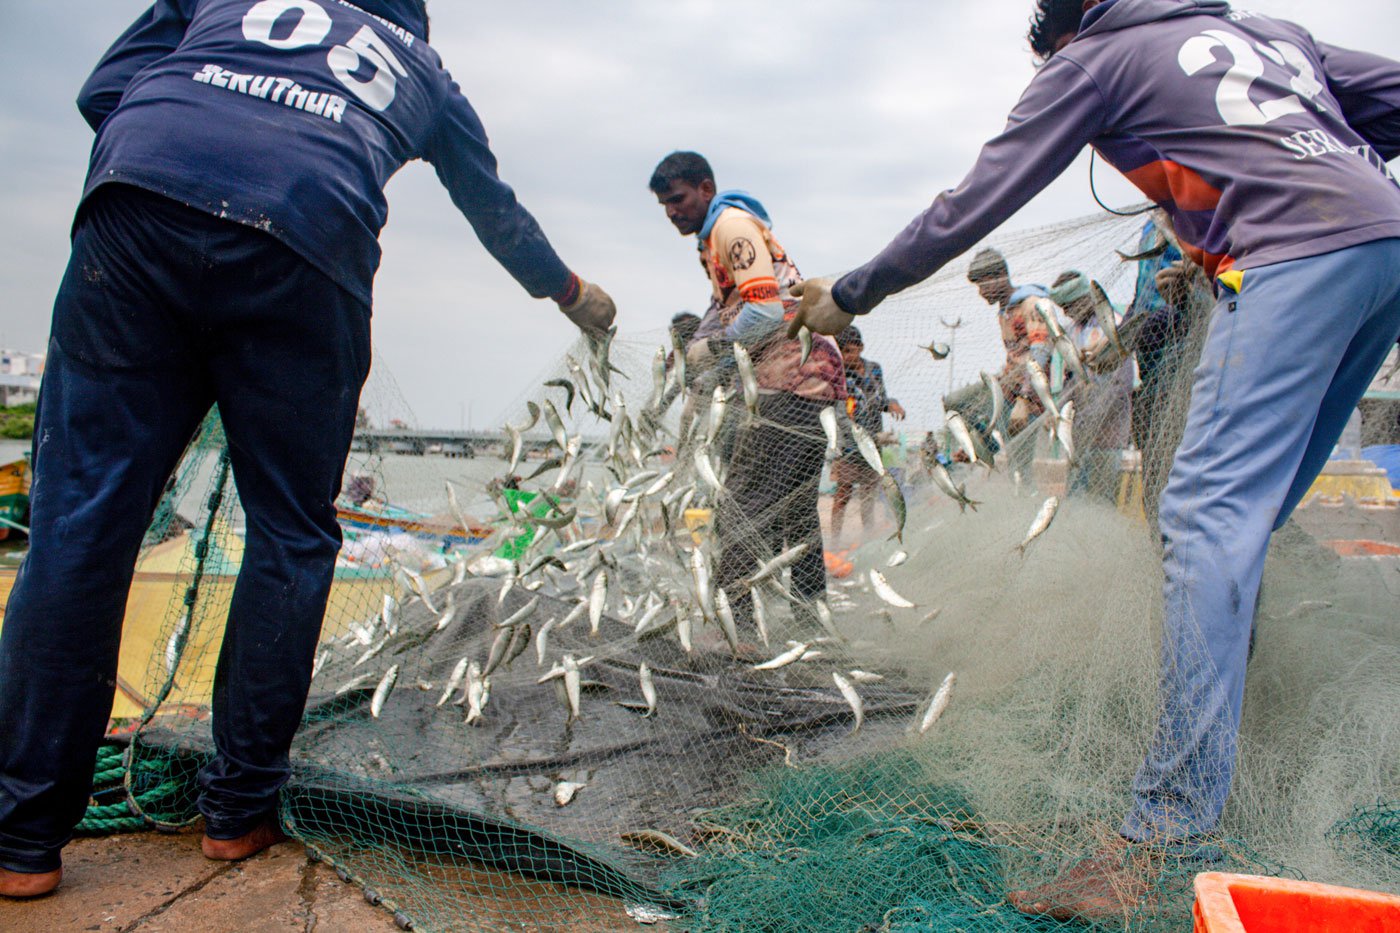 When sardines are in season, many fishermen are required for a successful catch